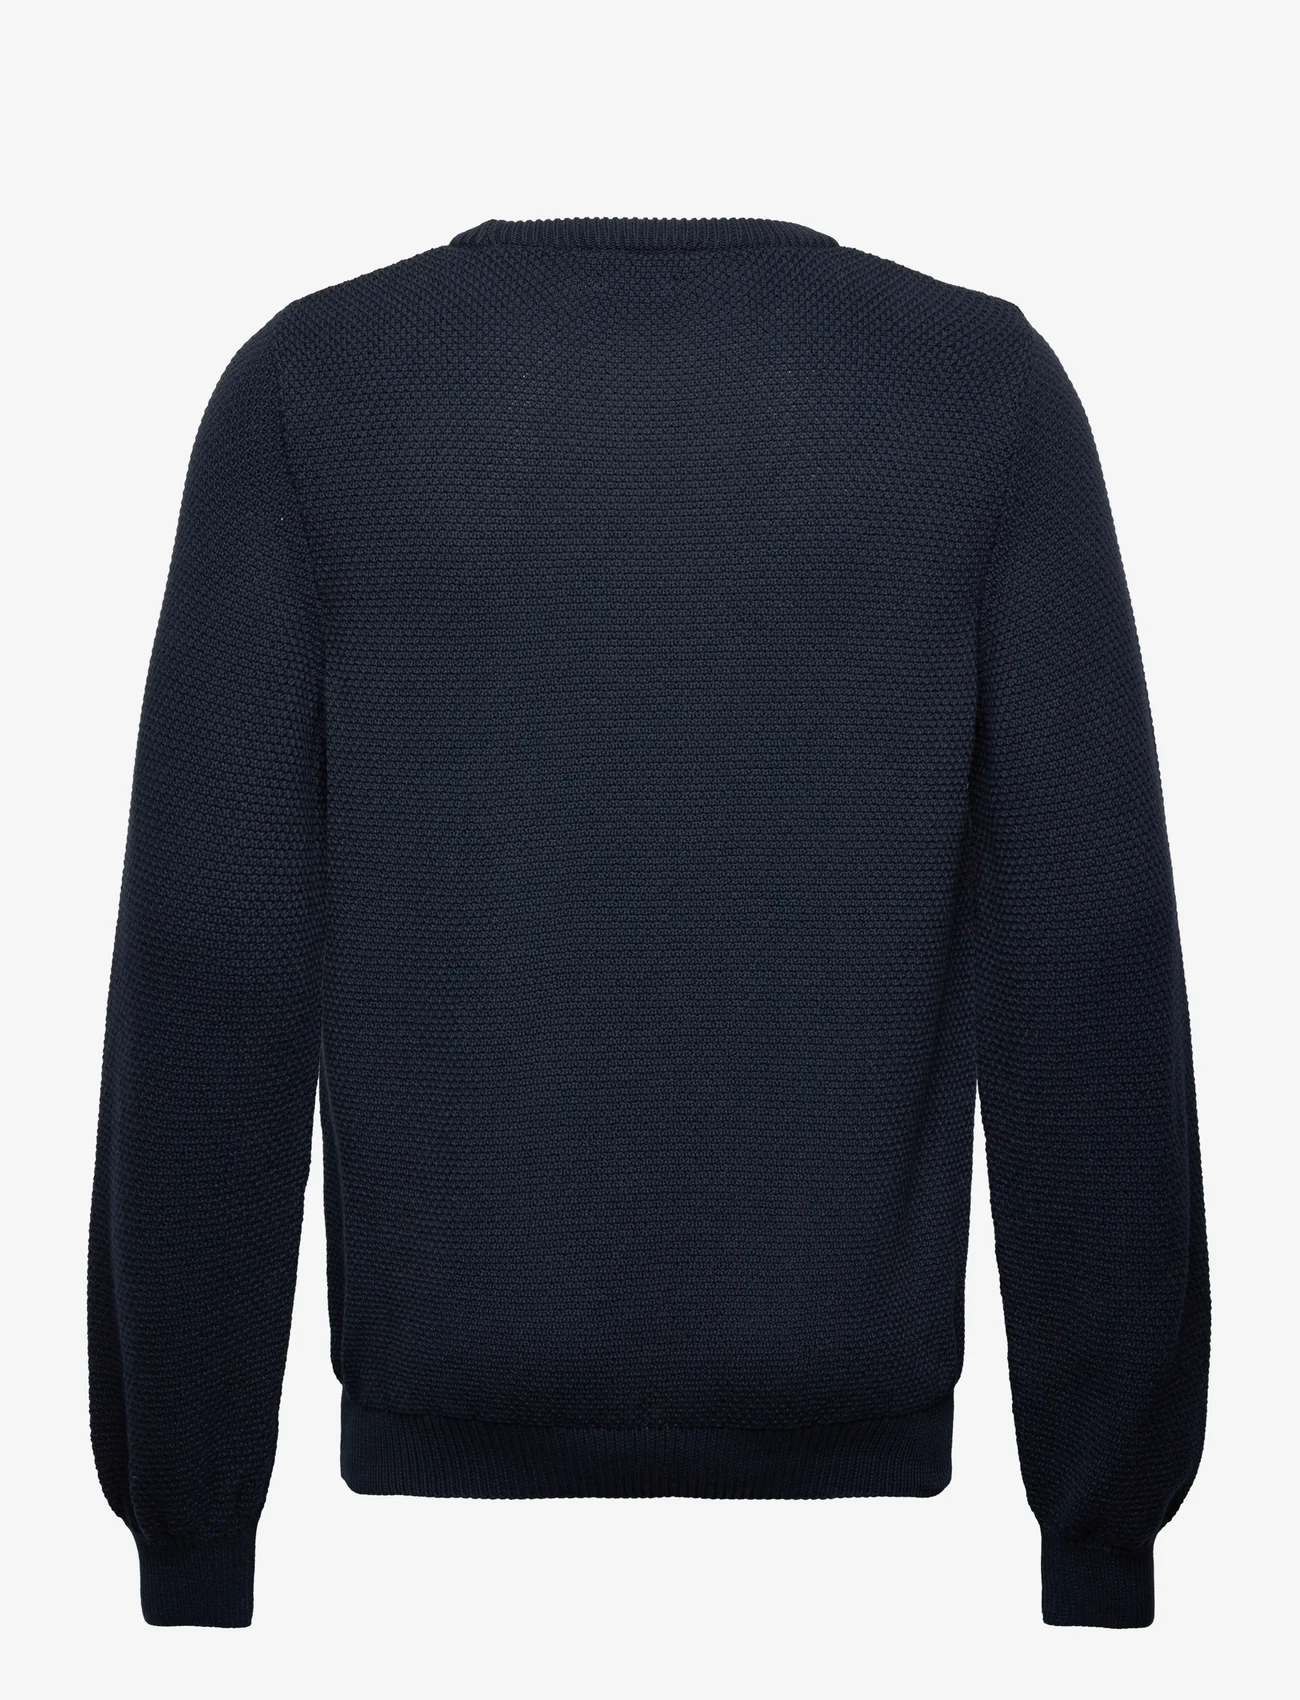 By Garment Makers - The Organic Waffle knit - knitted round necks - navy blazer - 1